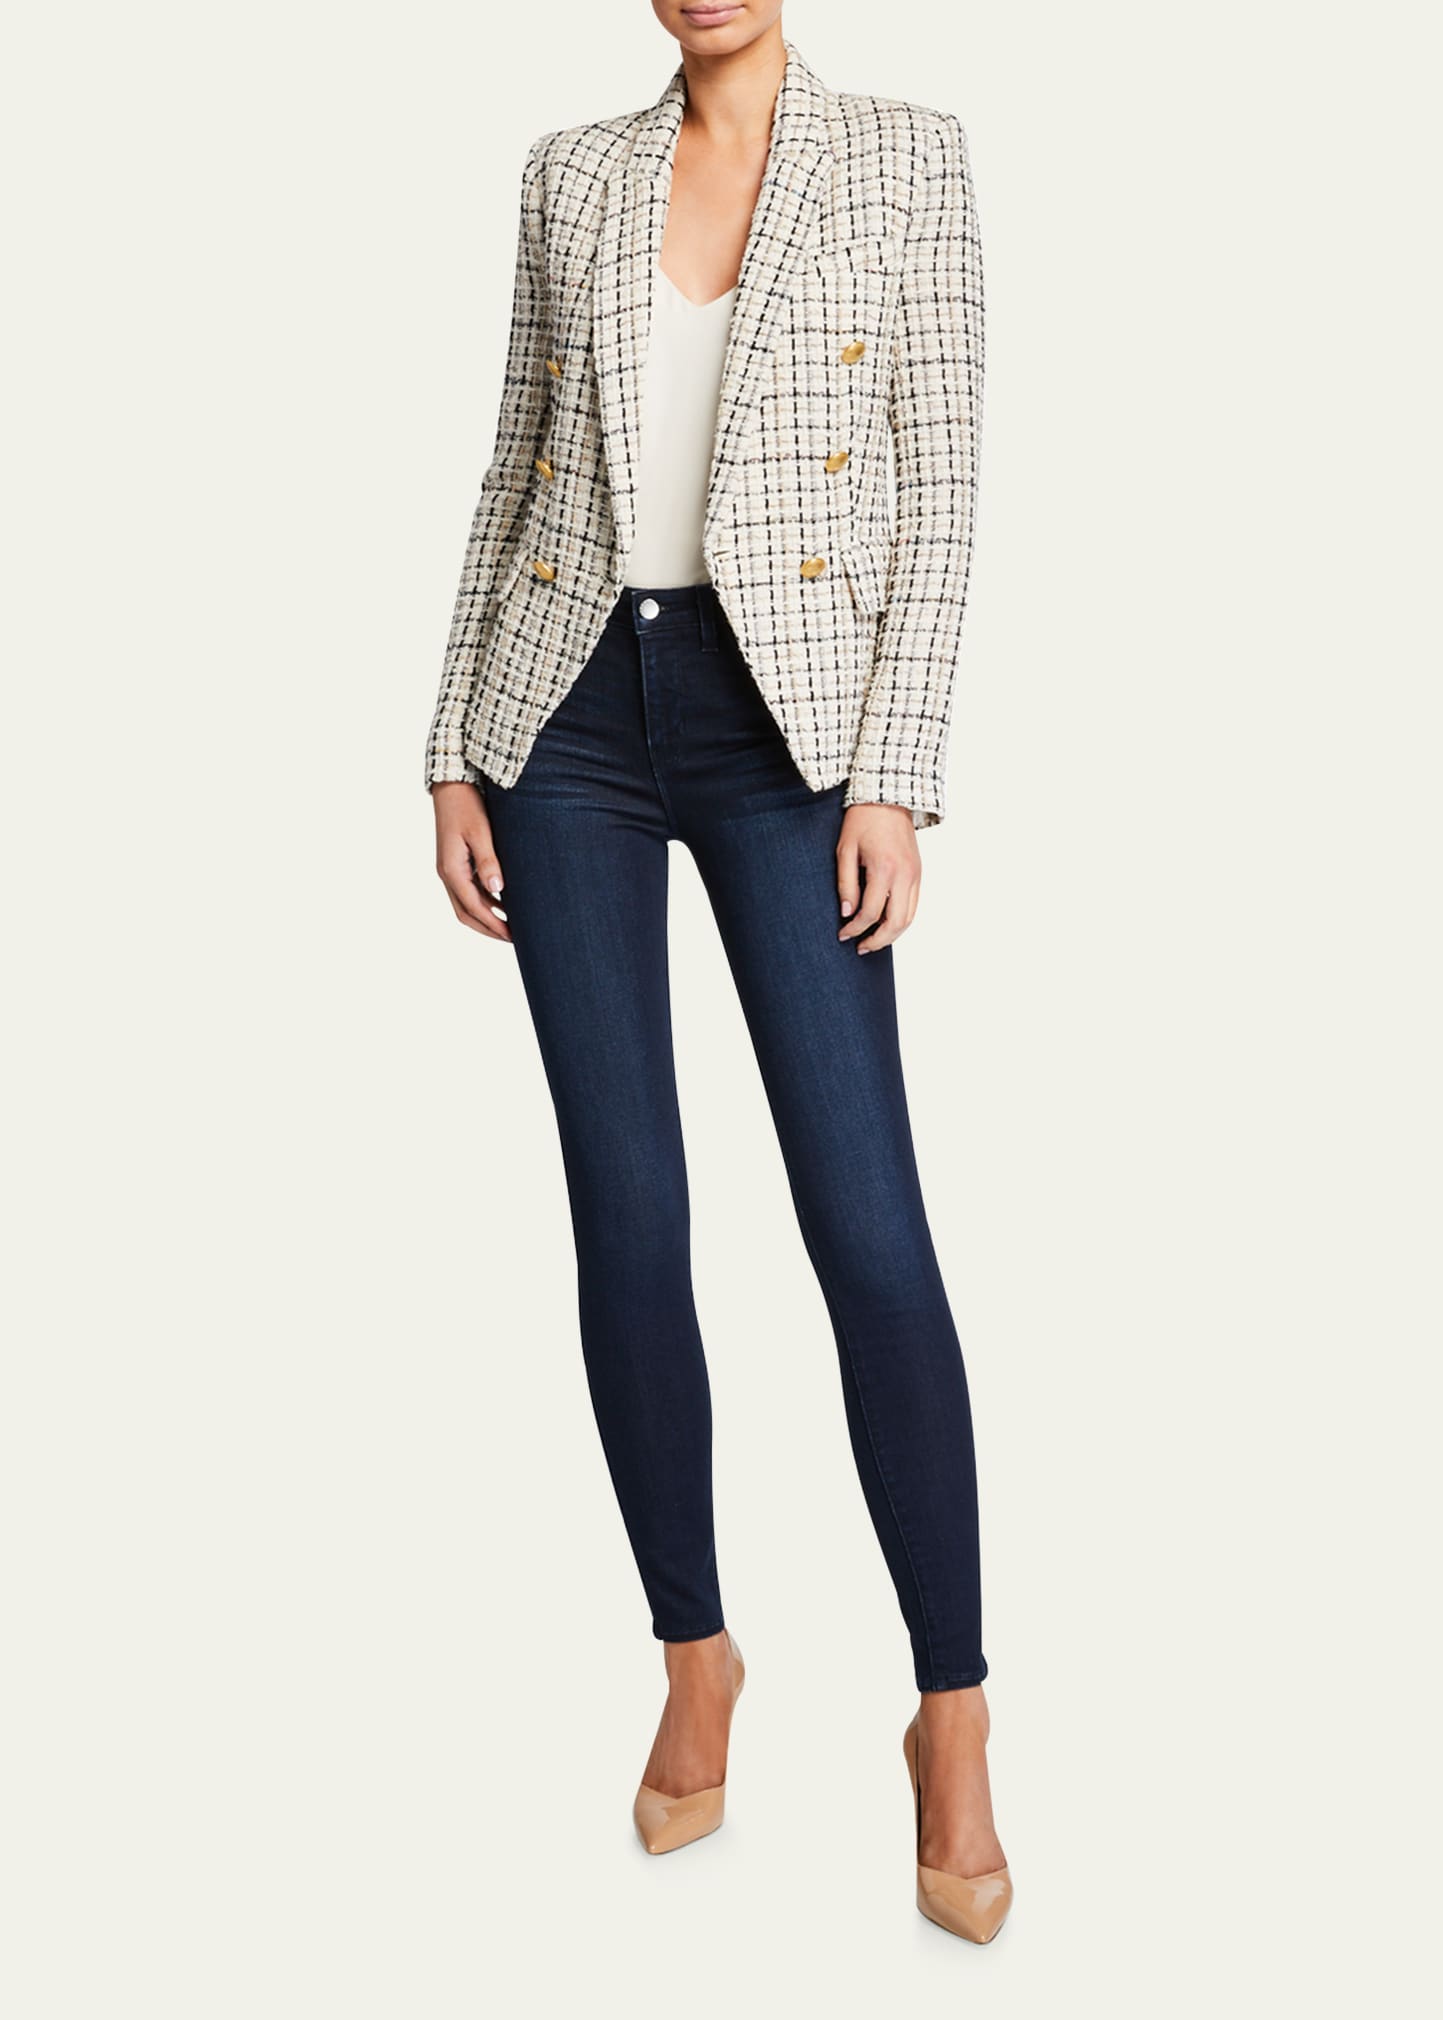 L'Agence Marguerite High-Rise Ankle Skinny Jeans